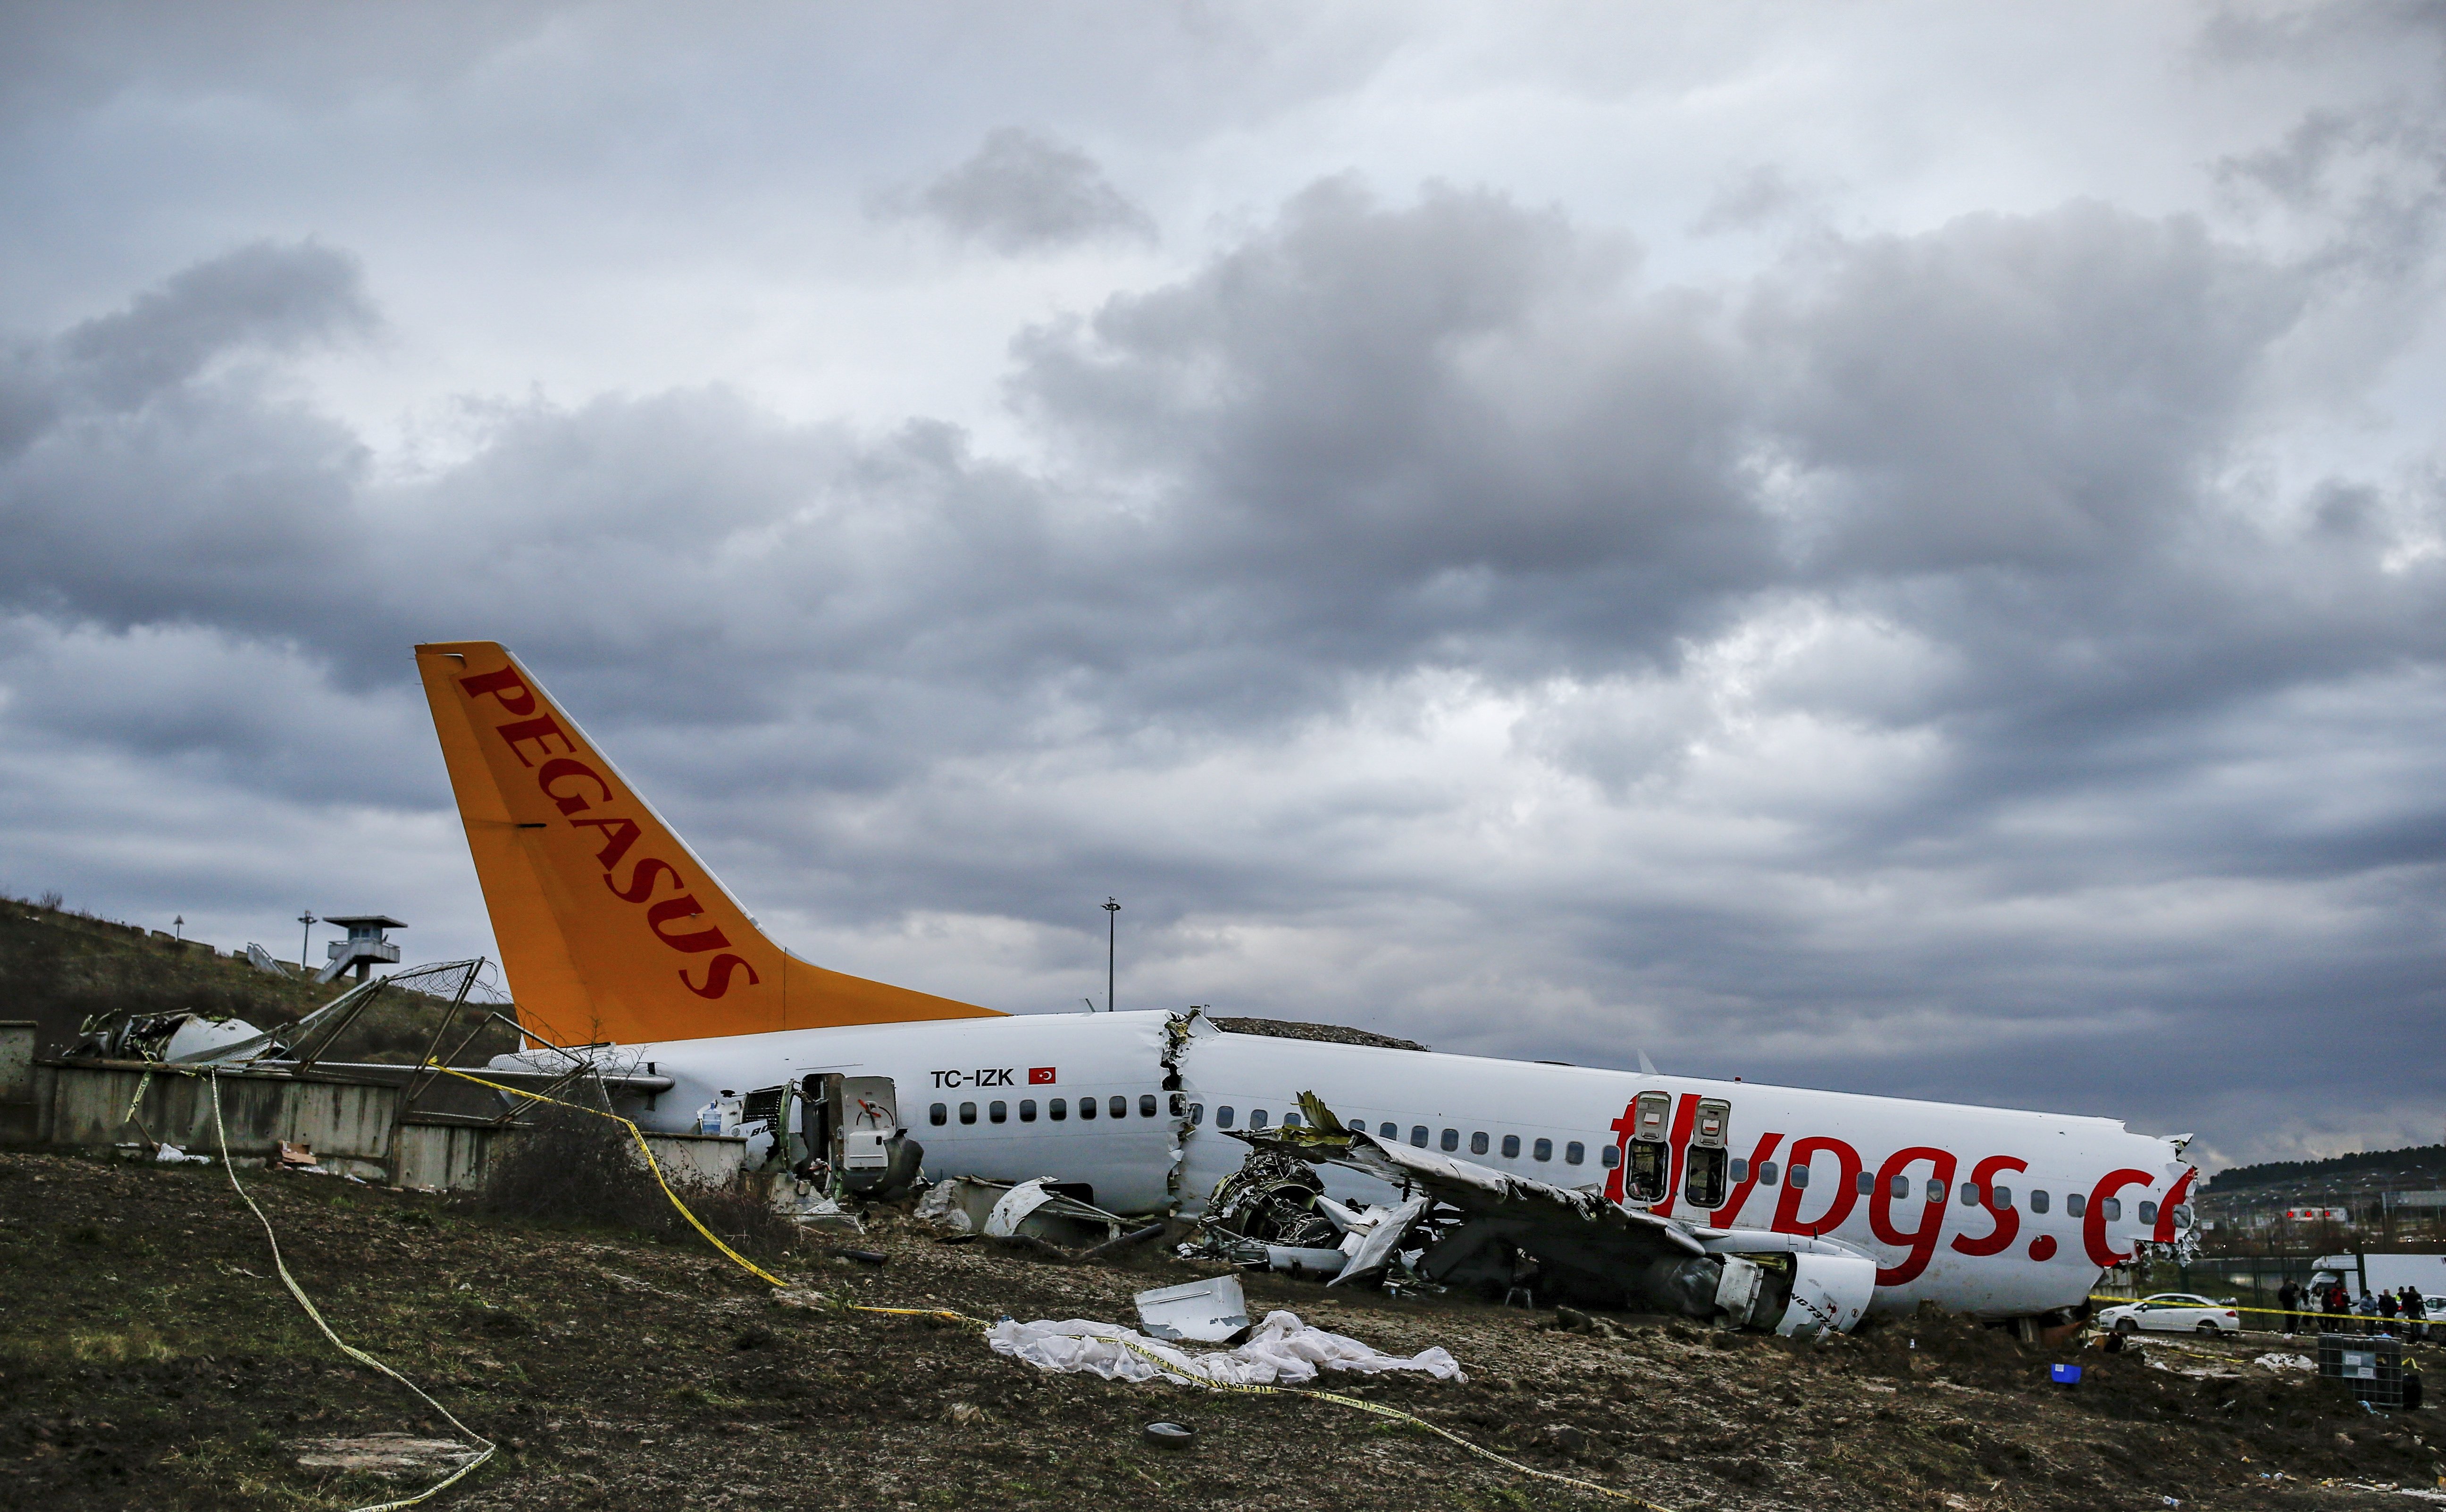 turkey s pegasus airlines accused of covering up technical mishaps daily sabah